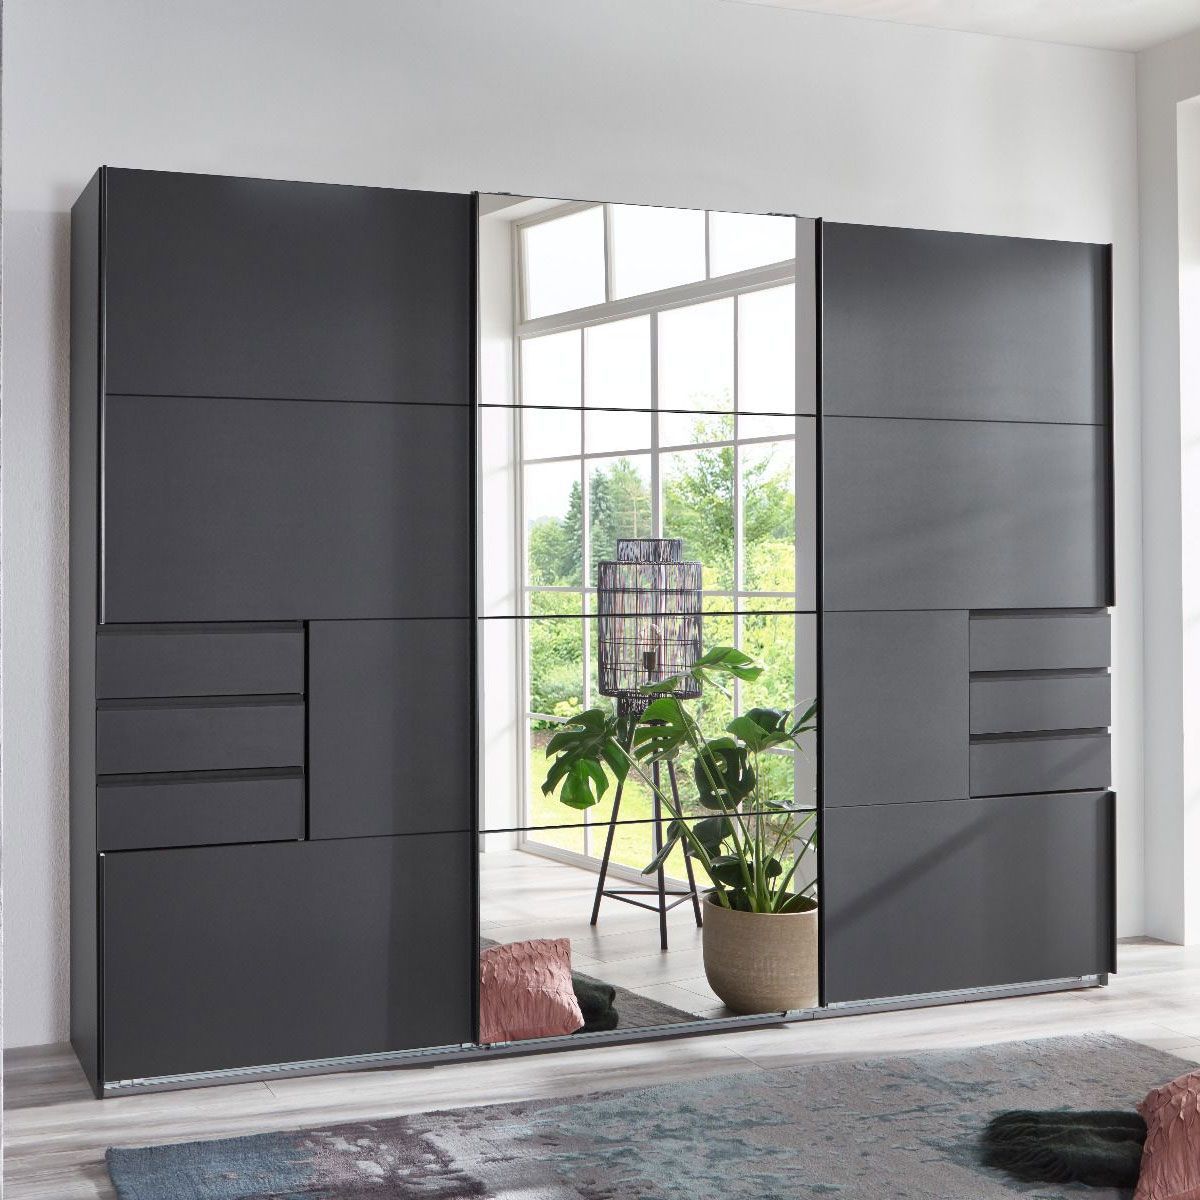 Mirrored Wardrobes On Sale | Sliding Doors | Wardrobe Direct™ Throughout Mirrored Wardrobes With Drawers (View 13 of 15)